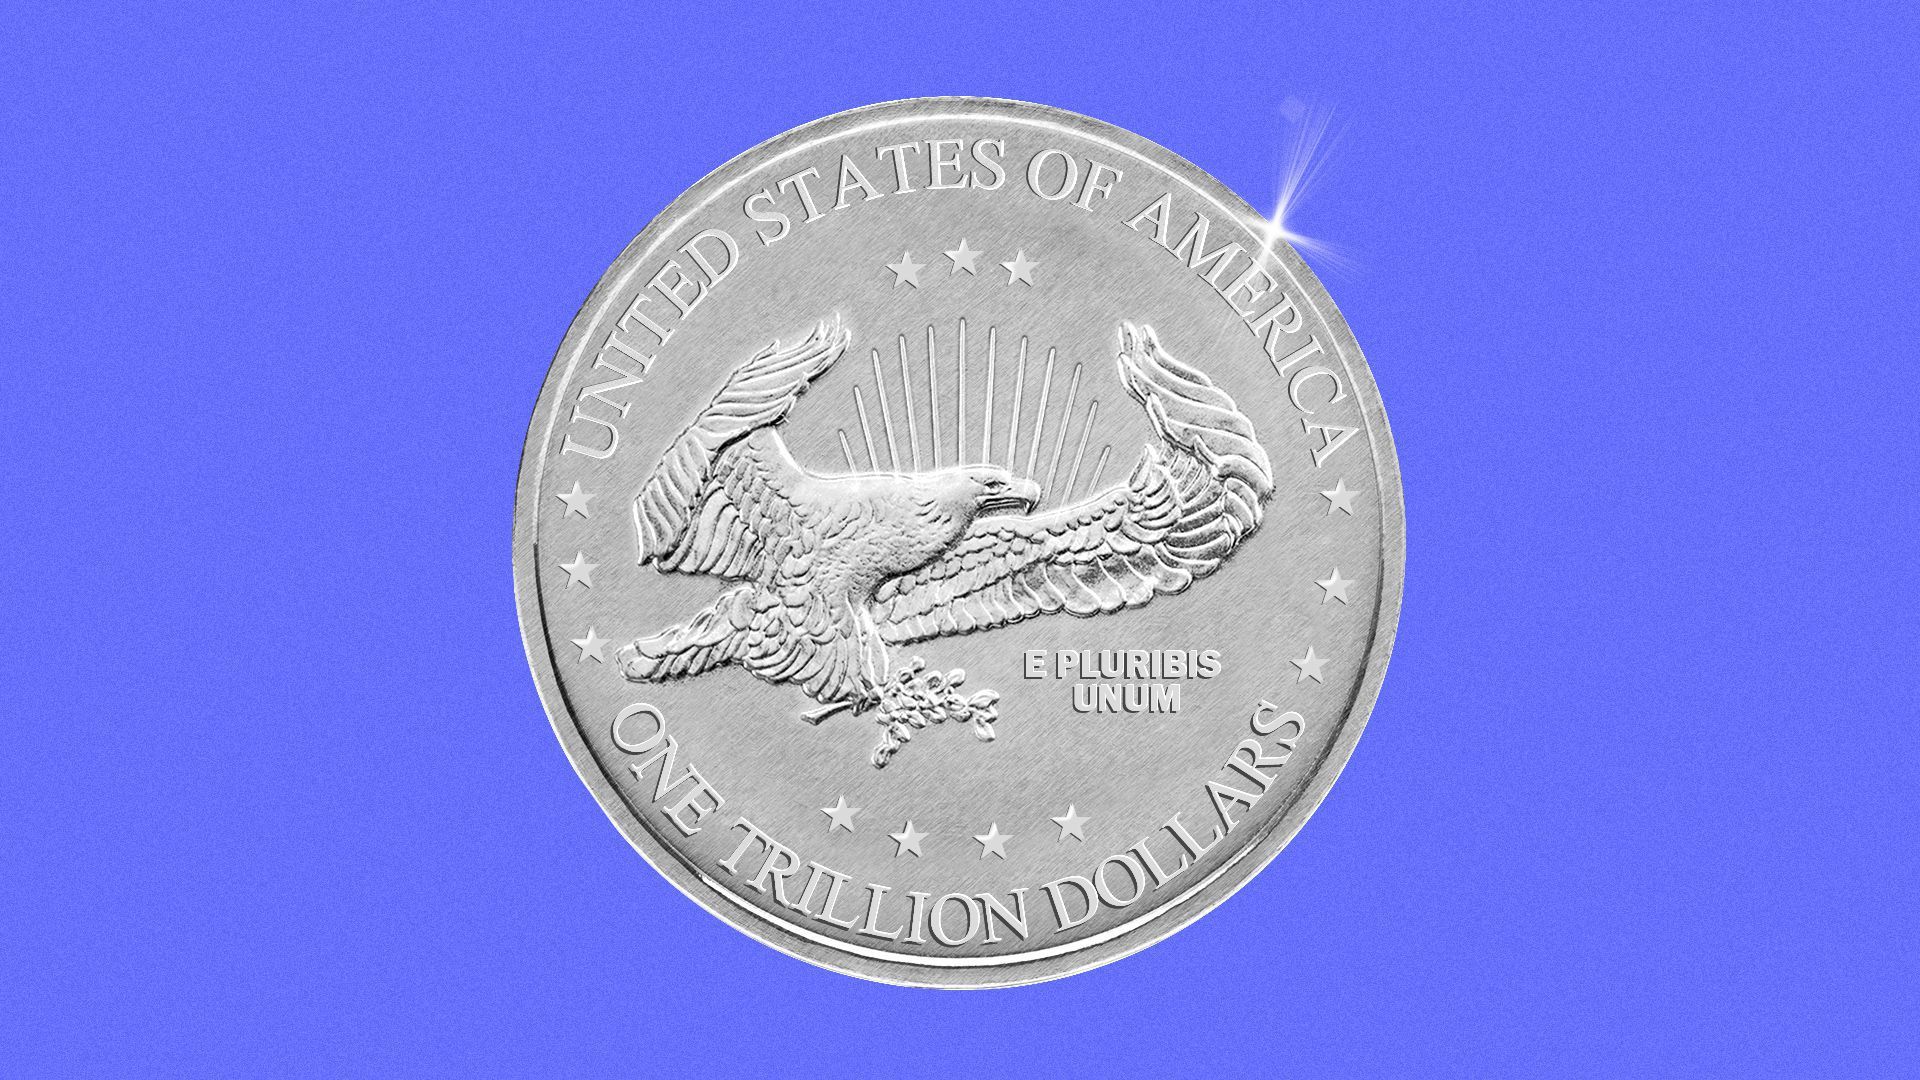 Illustration of a platinum coin worth $1 trillion against a purple background.